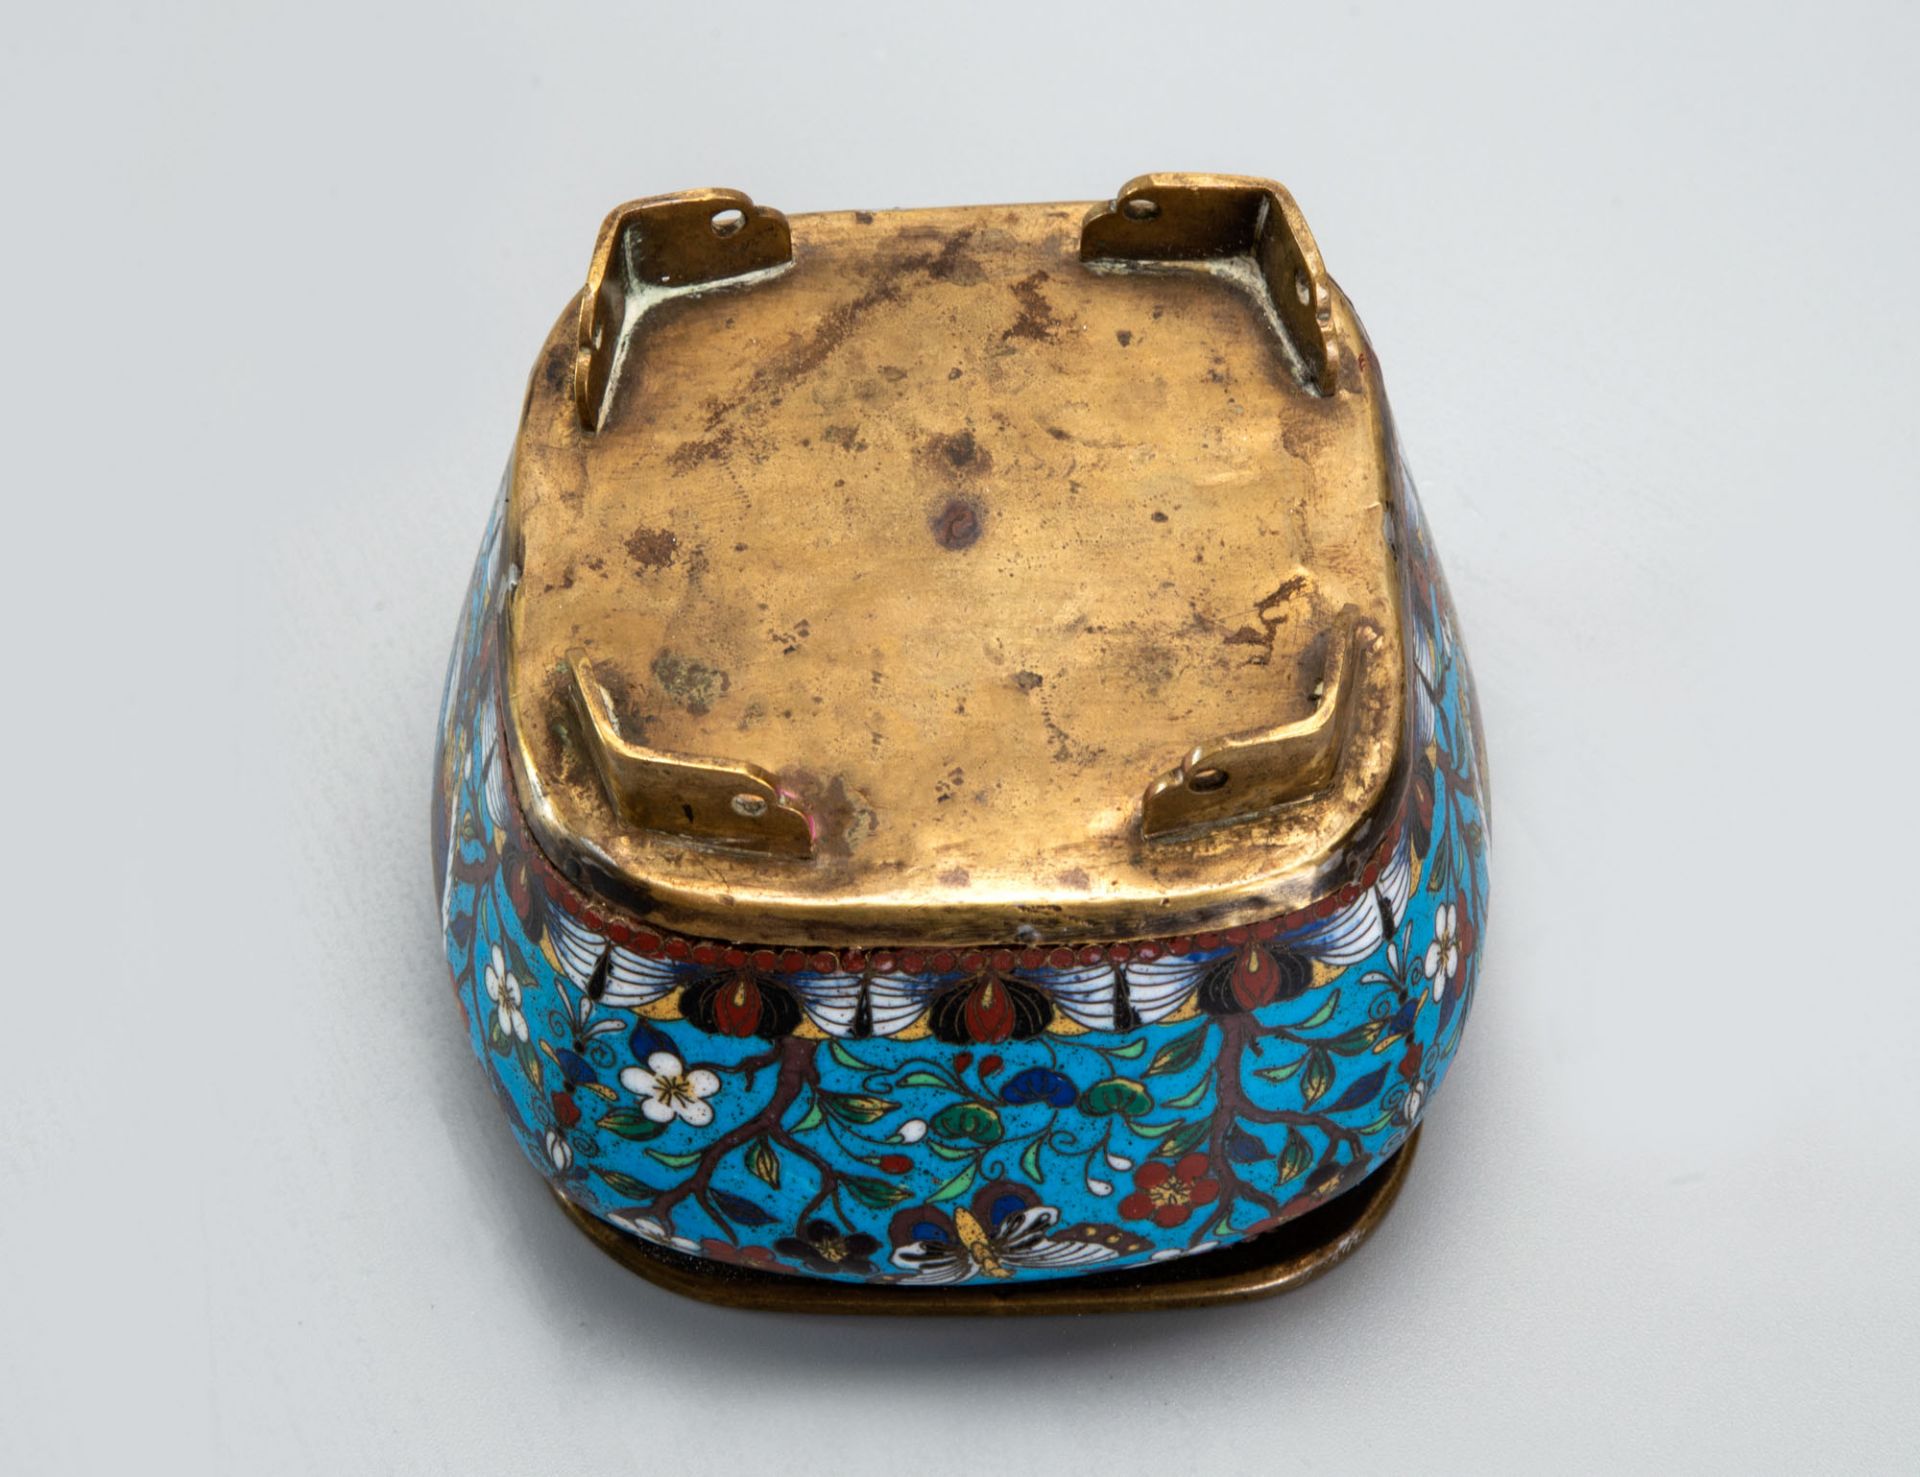 A Fine Cloisonne Incense Burner, China, Qing Dynasty, 18th-19th Century - Image 3 of 4